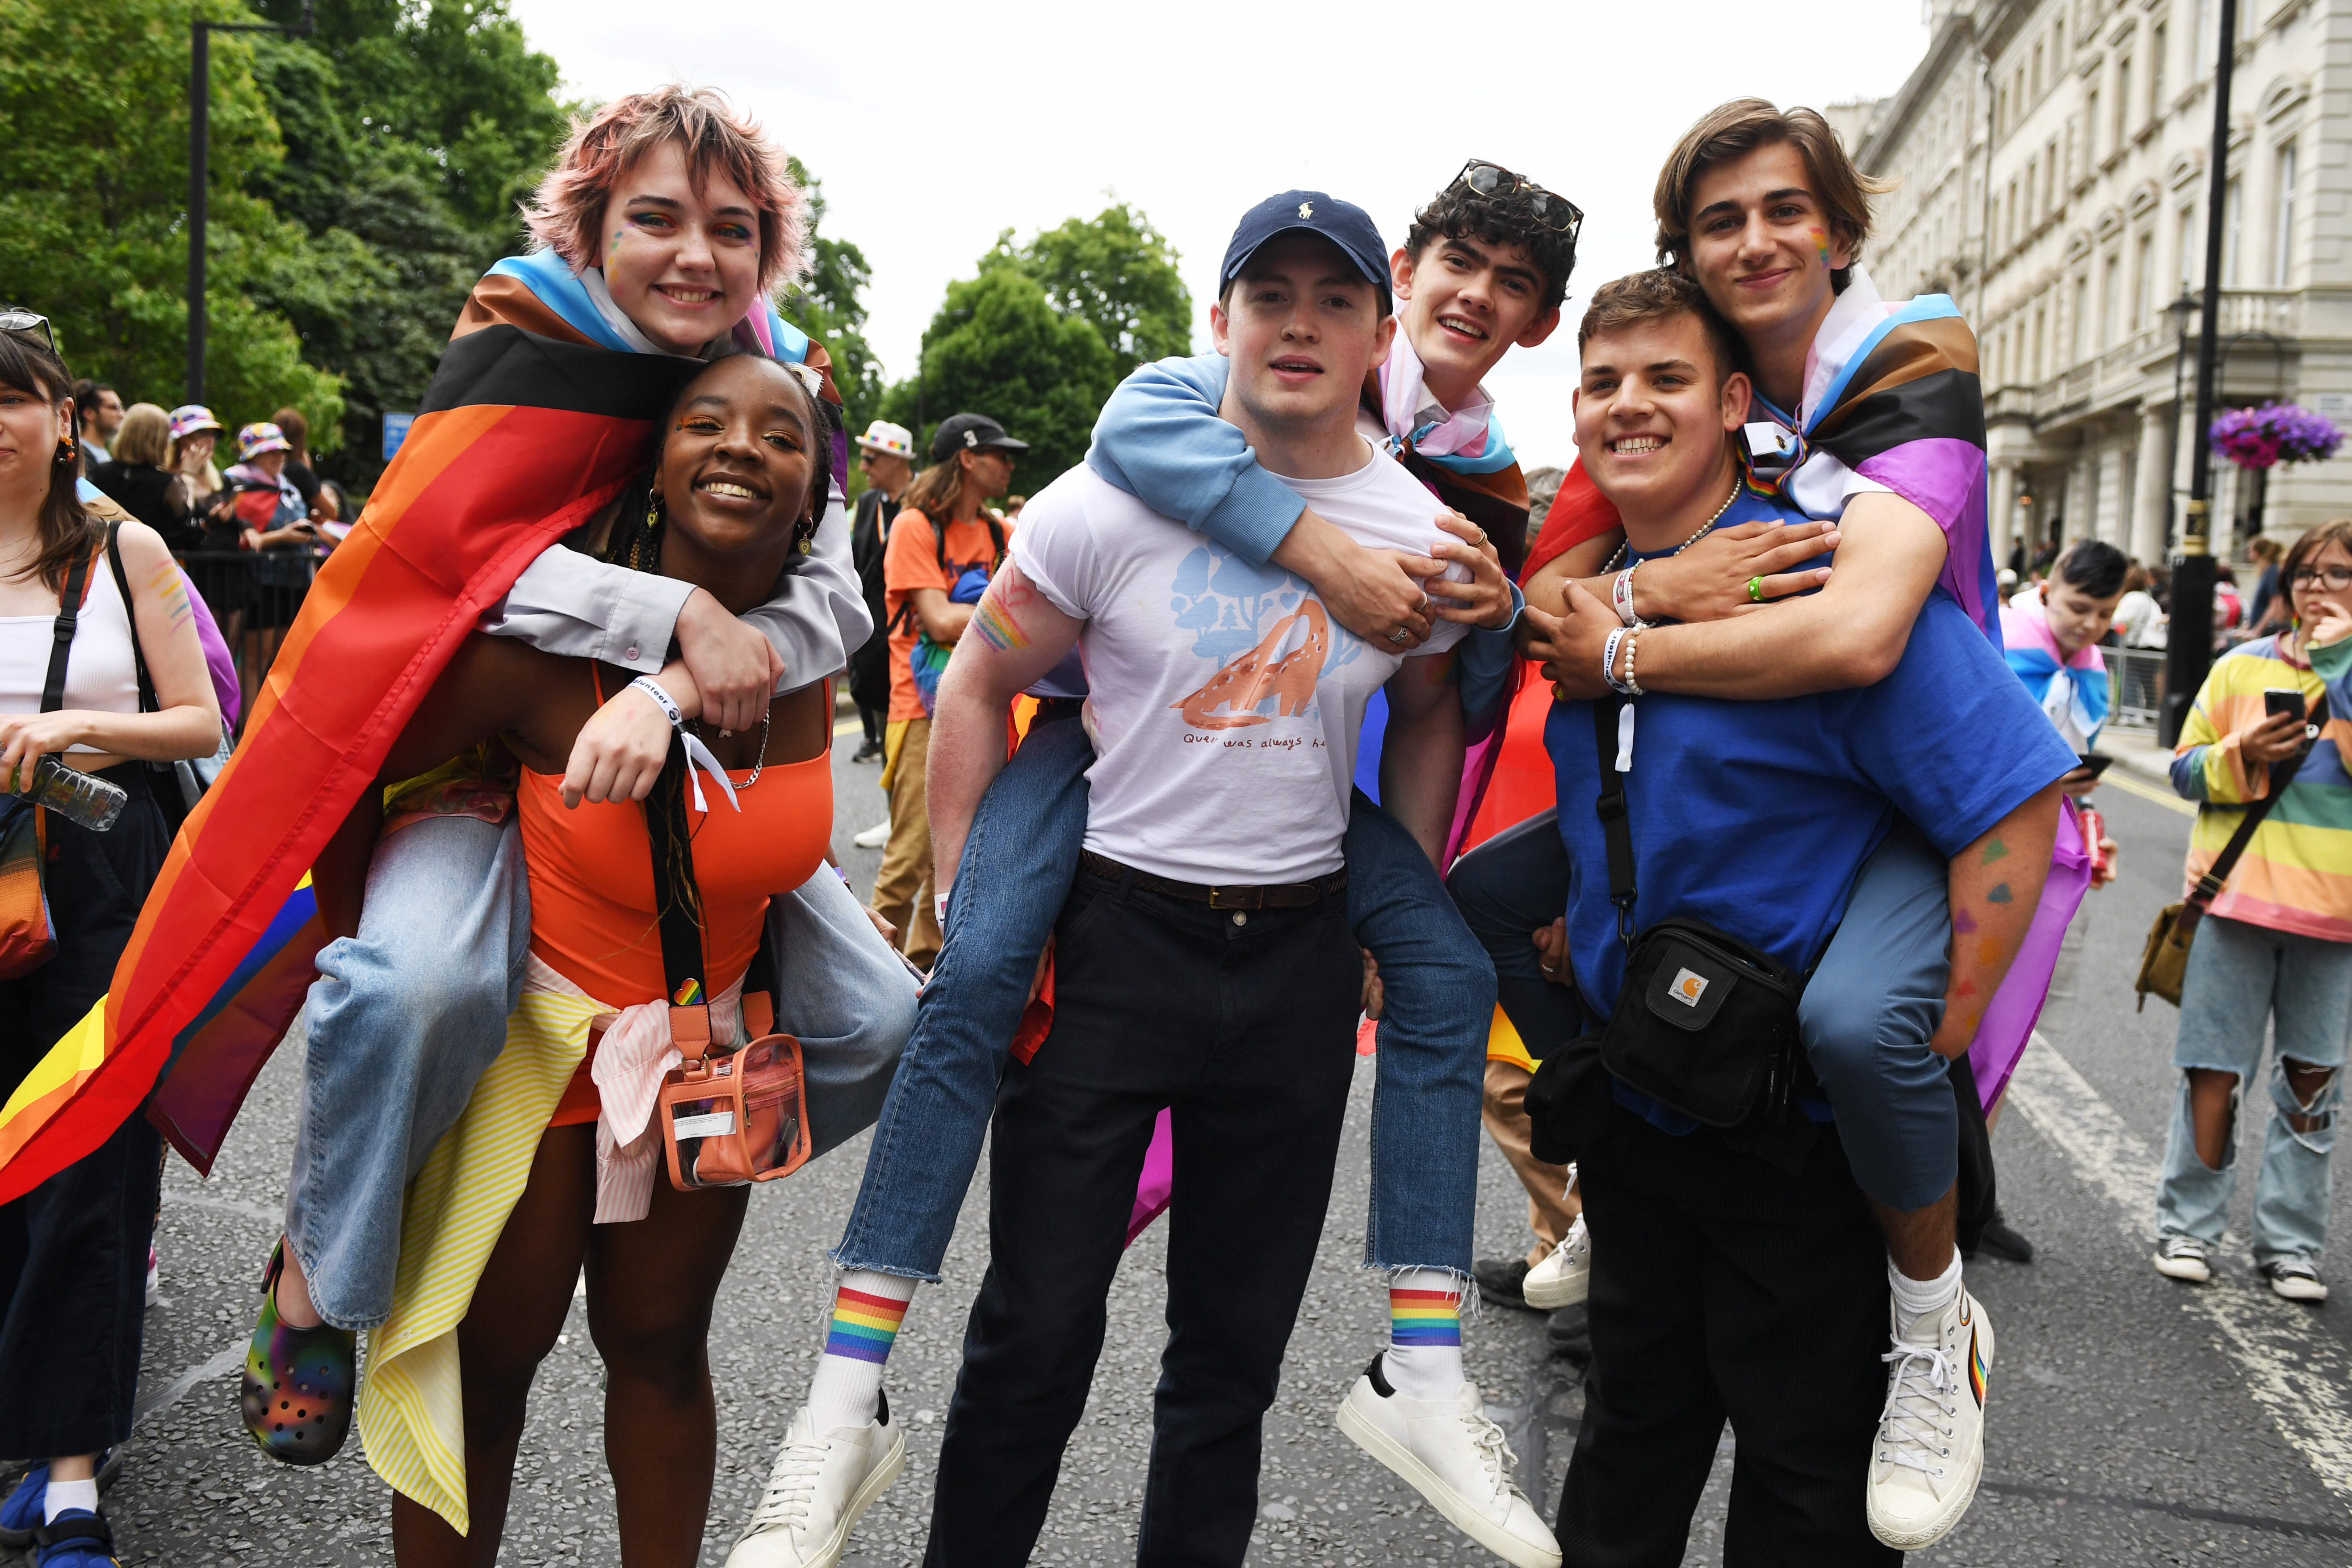 The cast of Heartstopper (L-R) Kizzy Edgell, Corinna Brown, Kit Connor, Joe Locke, Tobie Donovan and Sebastian Croft attend Pride in London 2022: The 50th Anniversary - Parade on July 2, 2022, in London, England. | Source: Getty Images